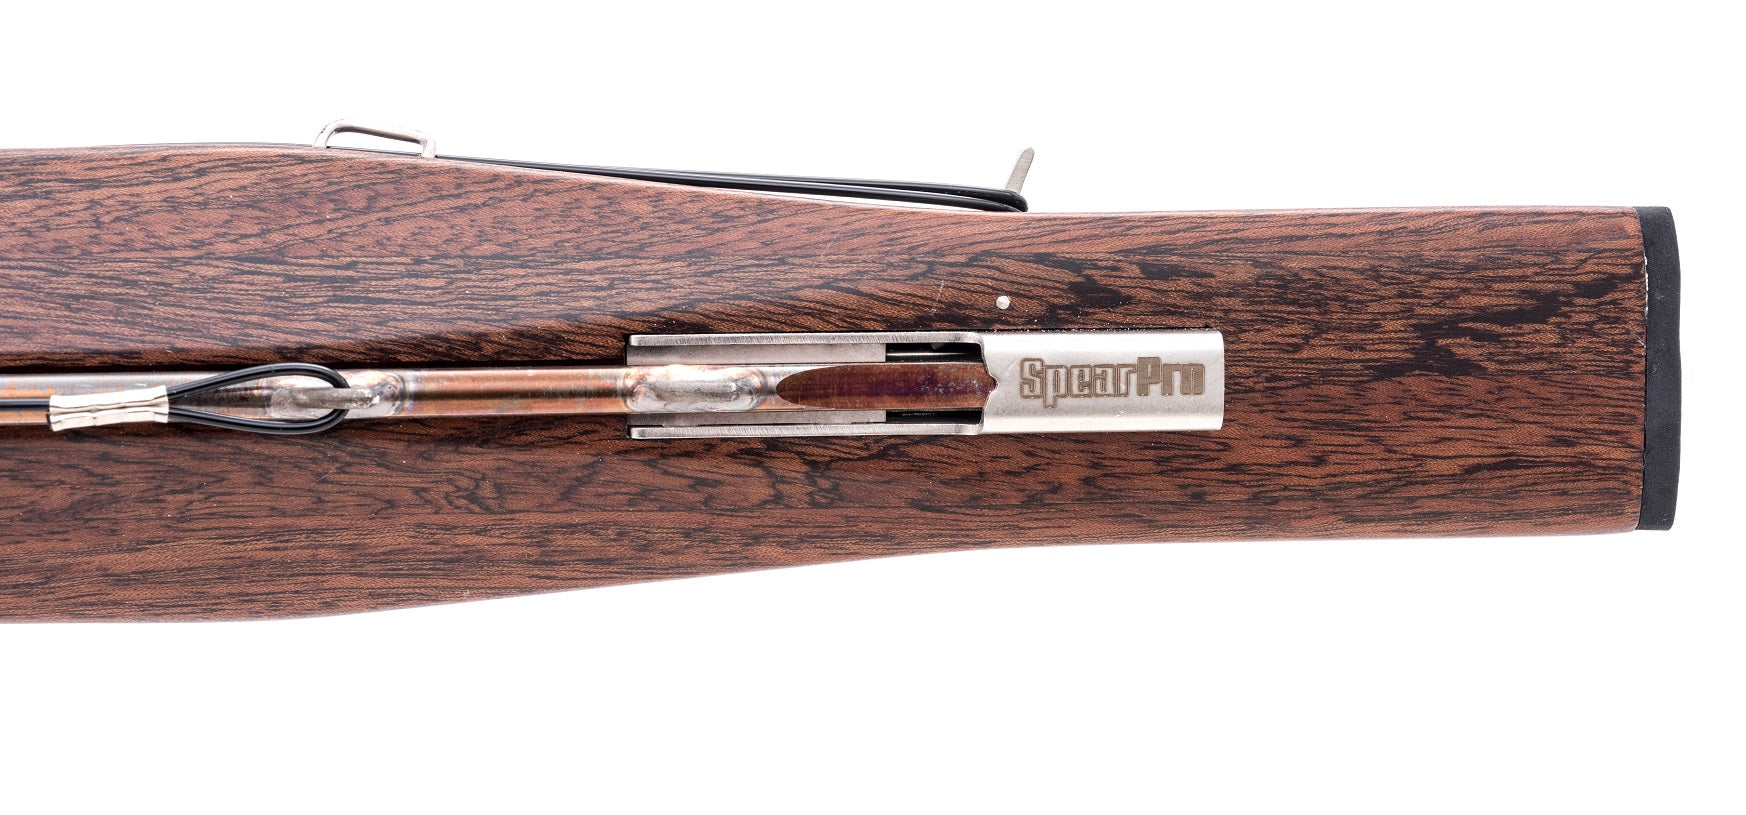 SOLD!!!!! Custom 52 (65 OA) Wood Speargun (Top of the Line